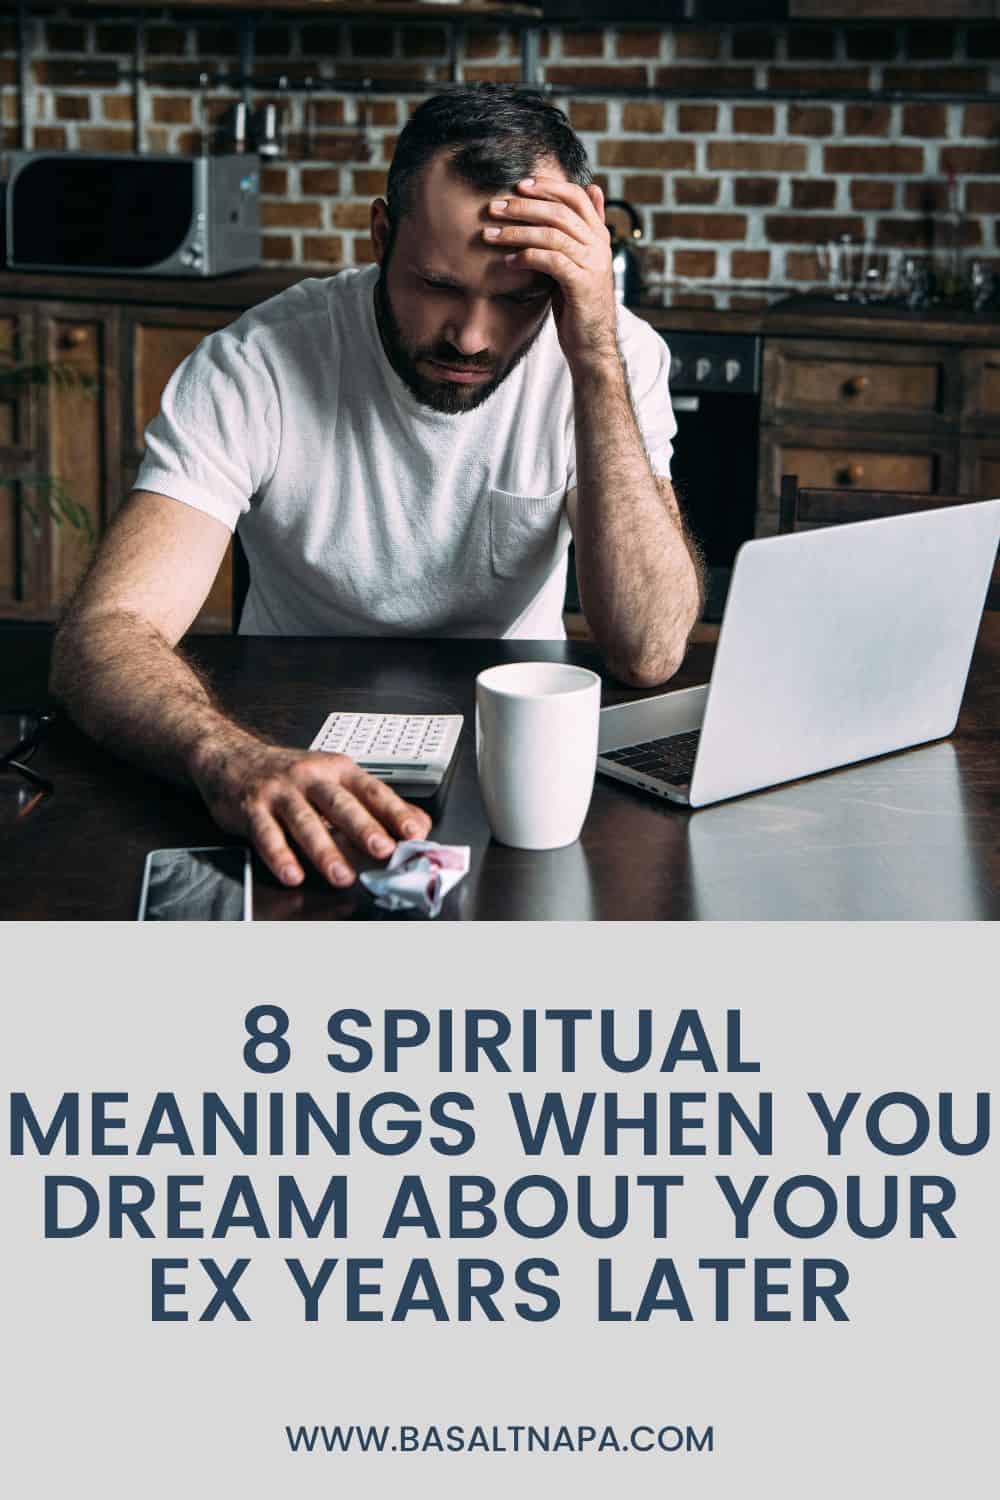 Spiritual Meanings When You Dream About My Ex Years Later